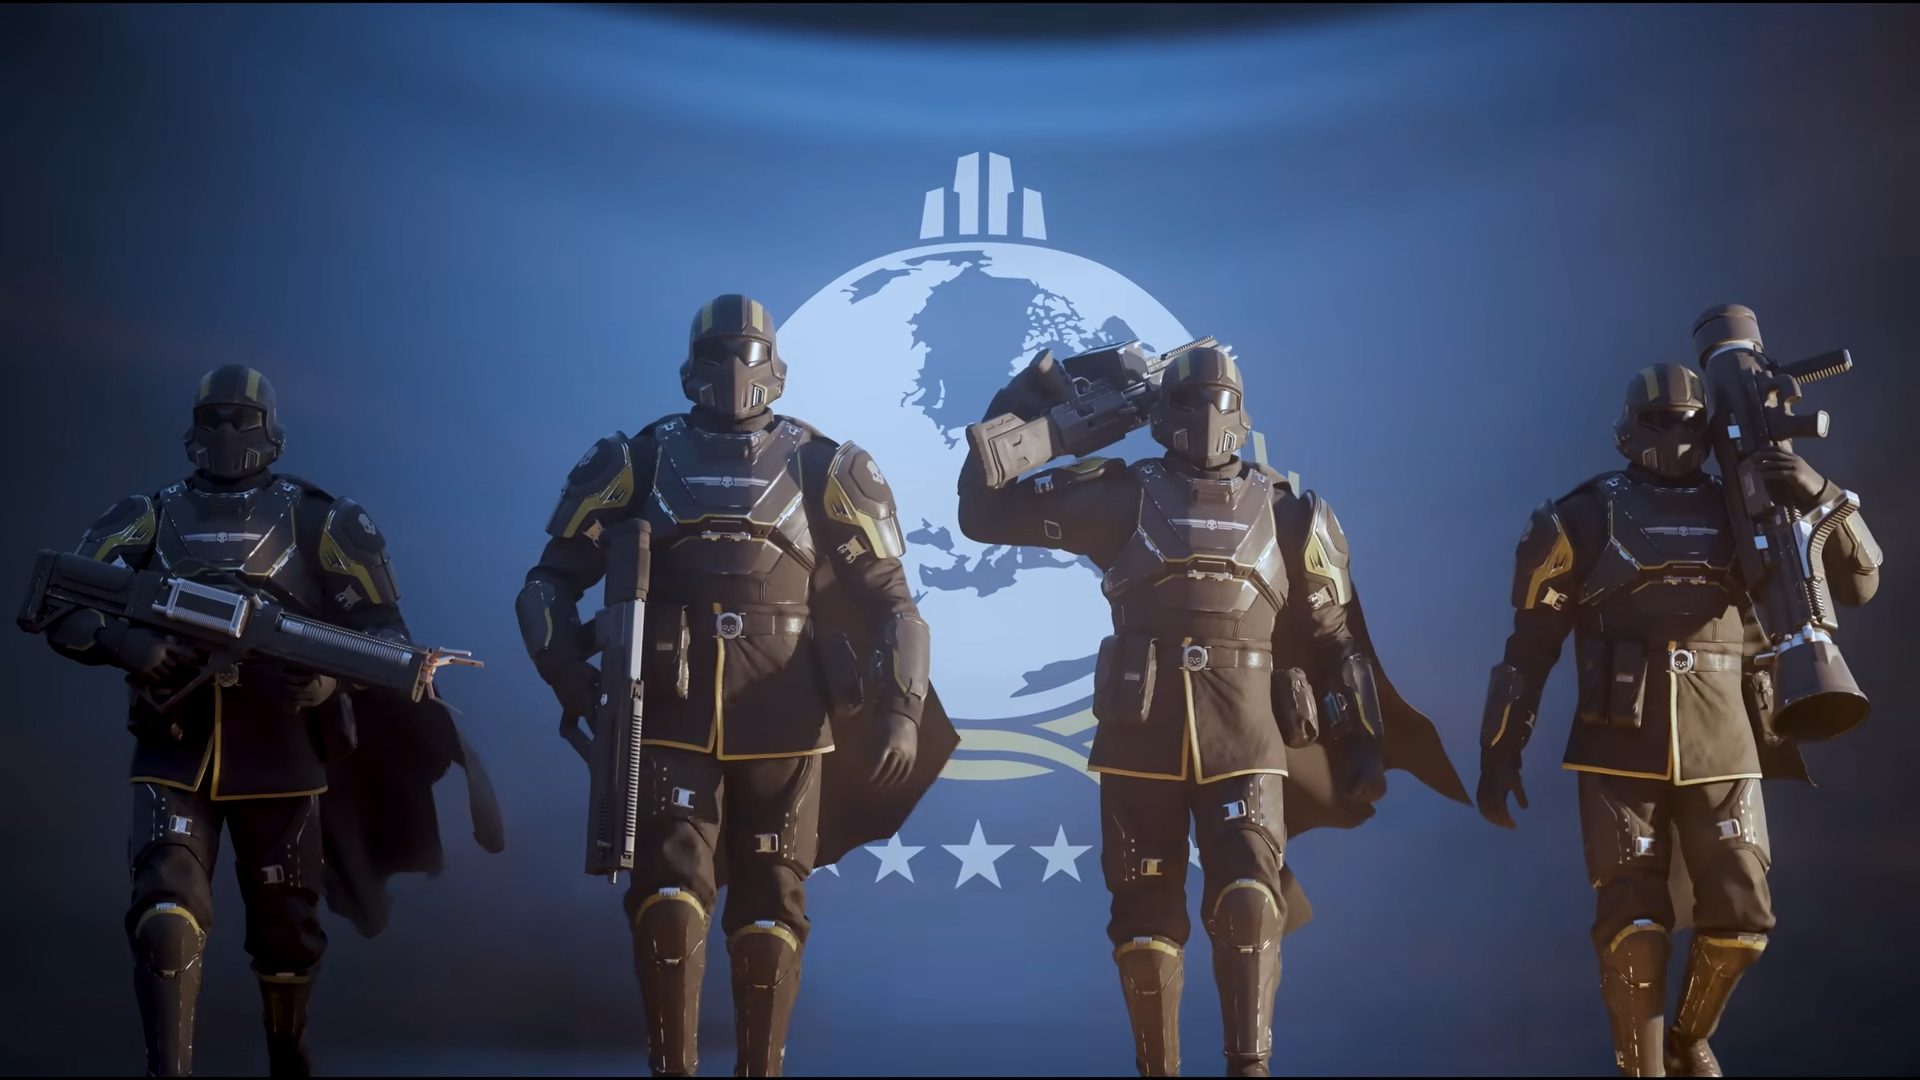 Helldivers 2 Unveiled: Release Date, Crossplay Details, Platforms, and Gameplay Insights – Your Ultimate Guide on Helldivers Wiki, Steam, and Xbox Availability